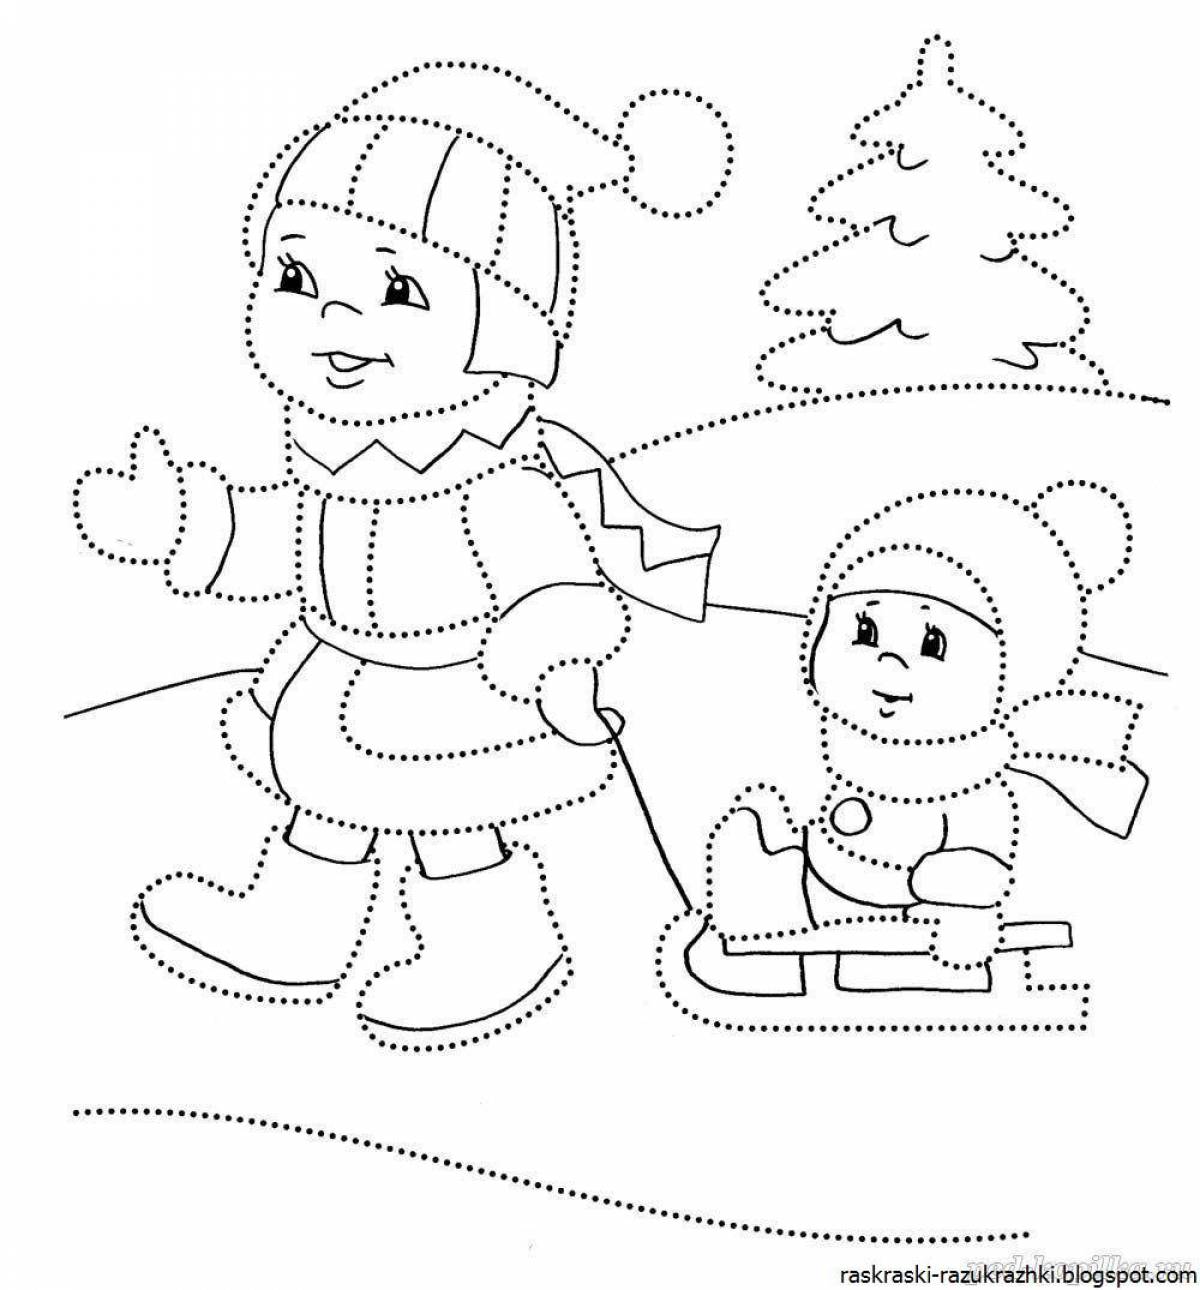 Bright coloring winter for children 6-7 years old